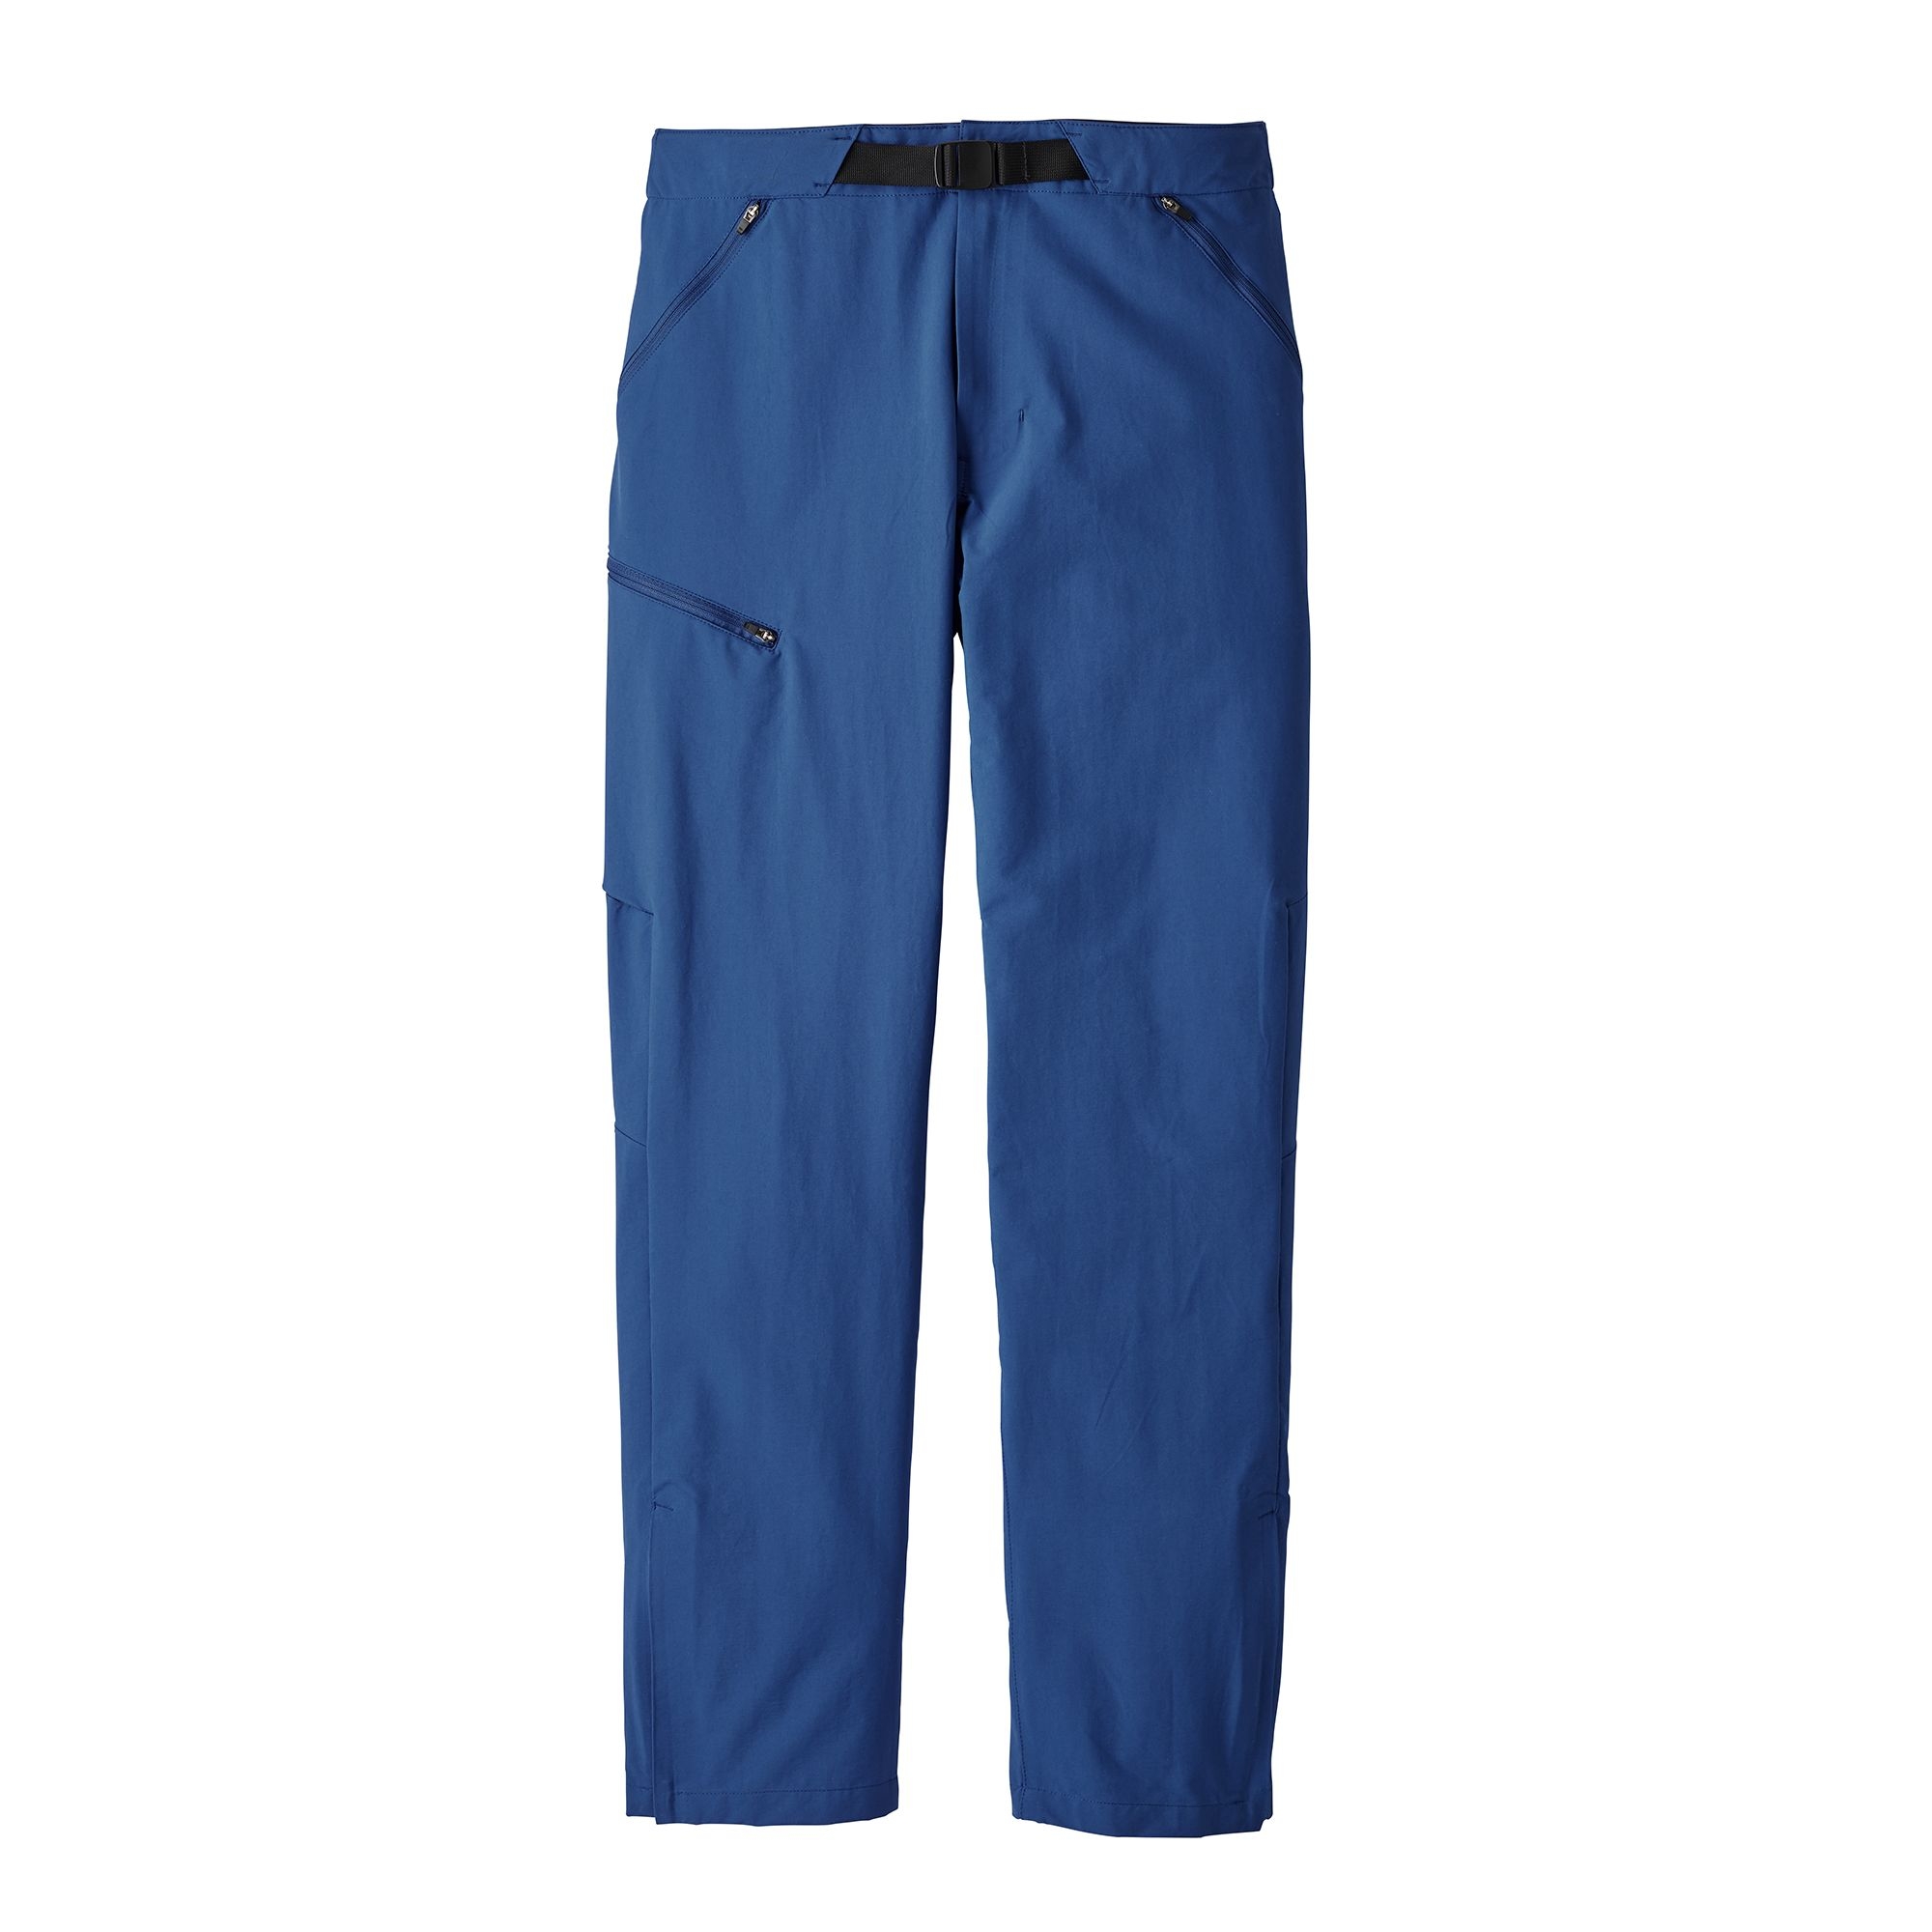 Patagonia Blue Active Pants Size M - 56% off